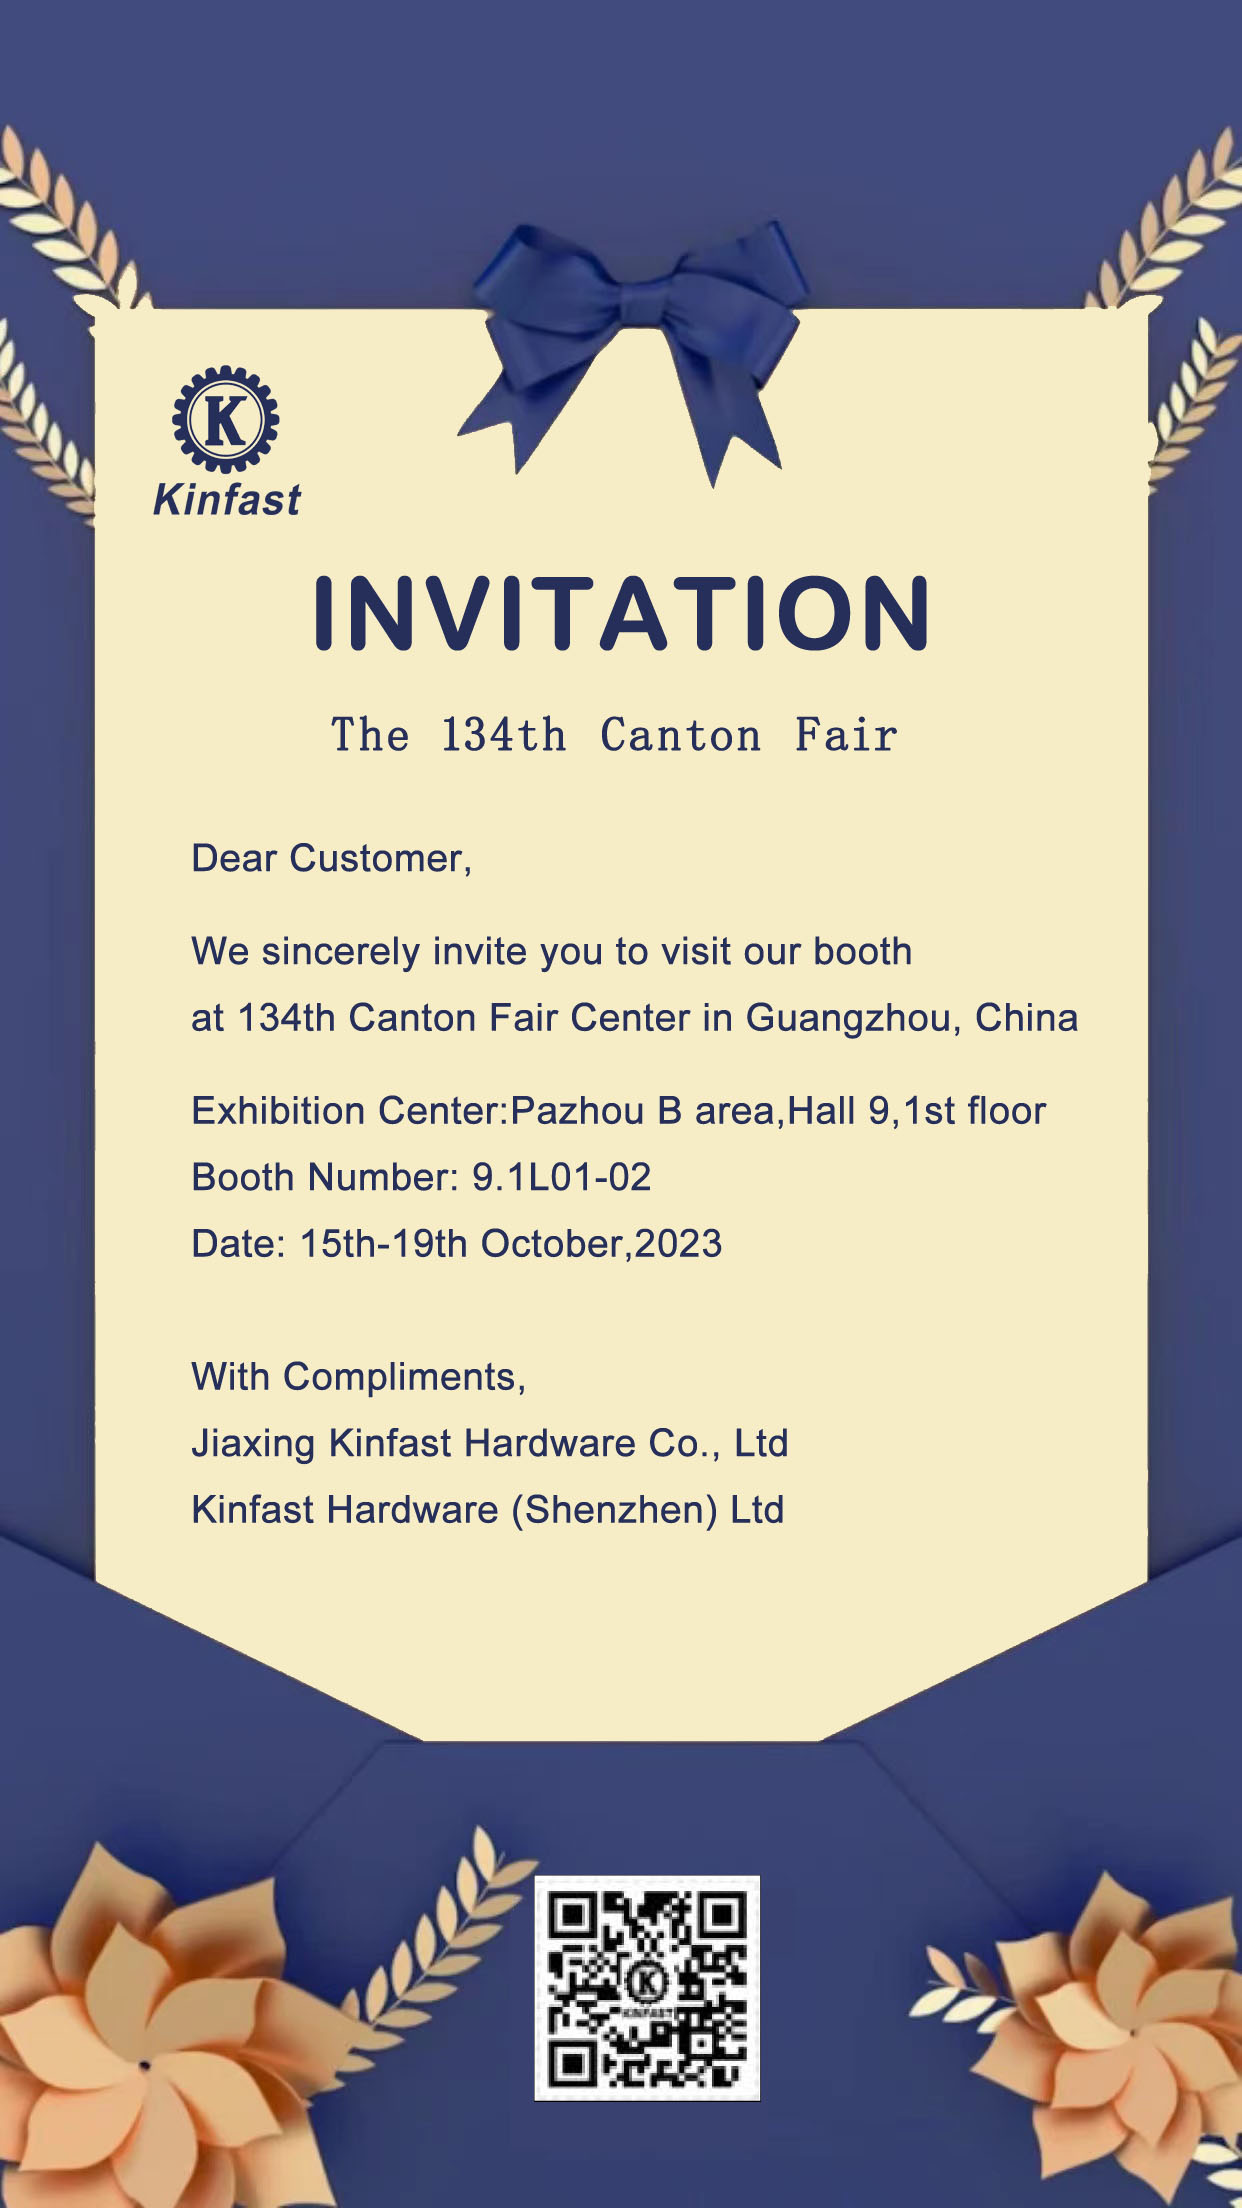 Welcome to visit us at the 134th Canton Fair